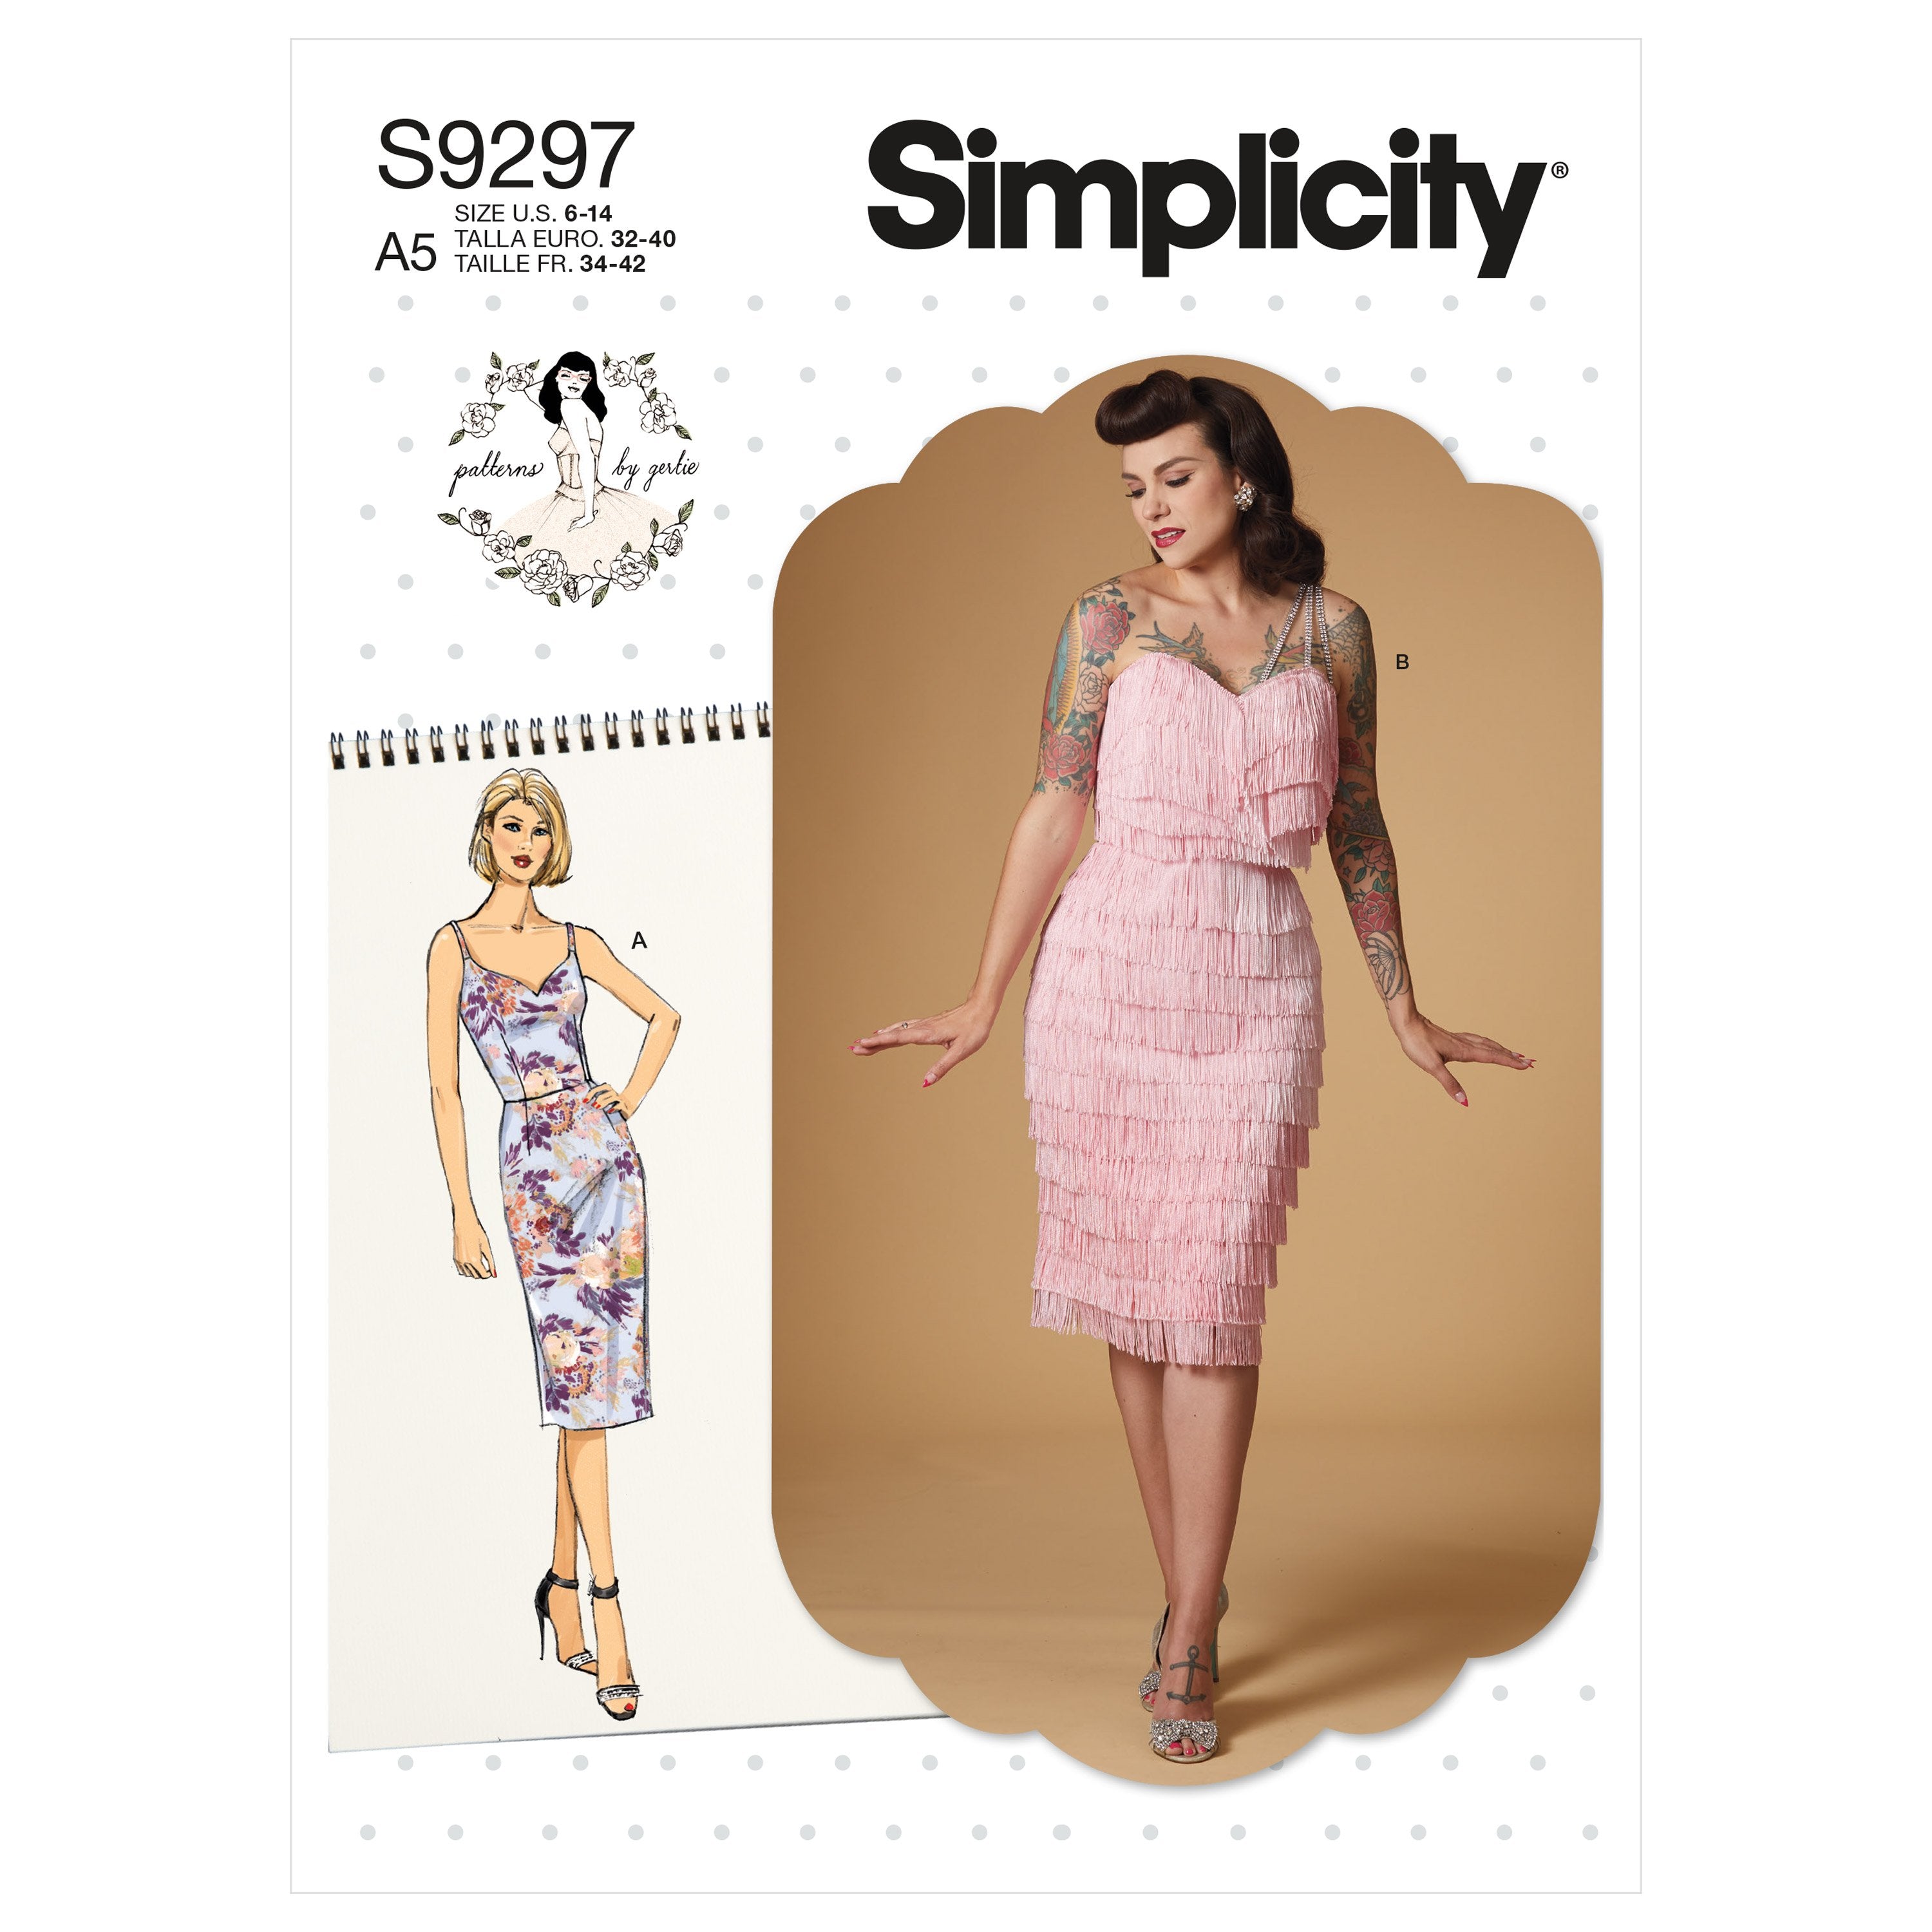 Simplicity 1950's Sewing Pattern 9297 Vintgae close fit Dress from Jaycotts Sewing Supplies